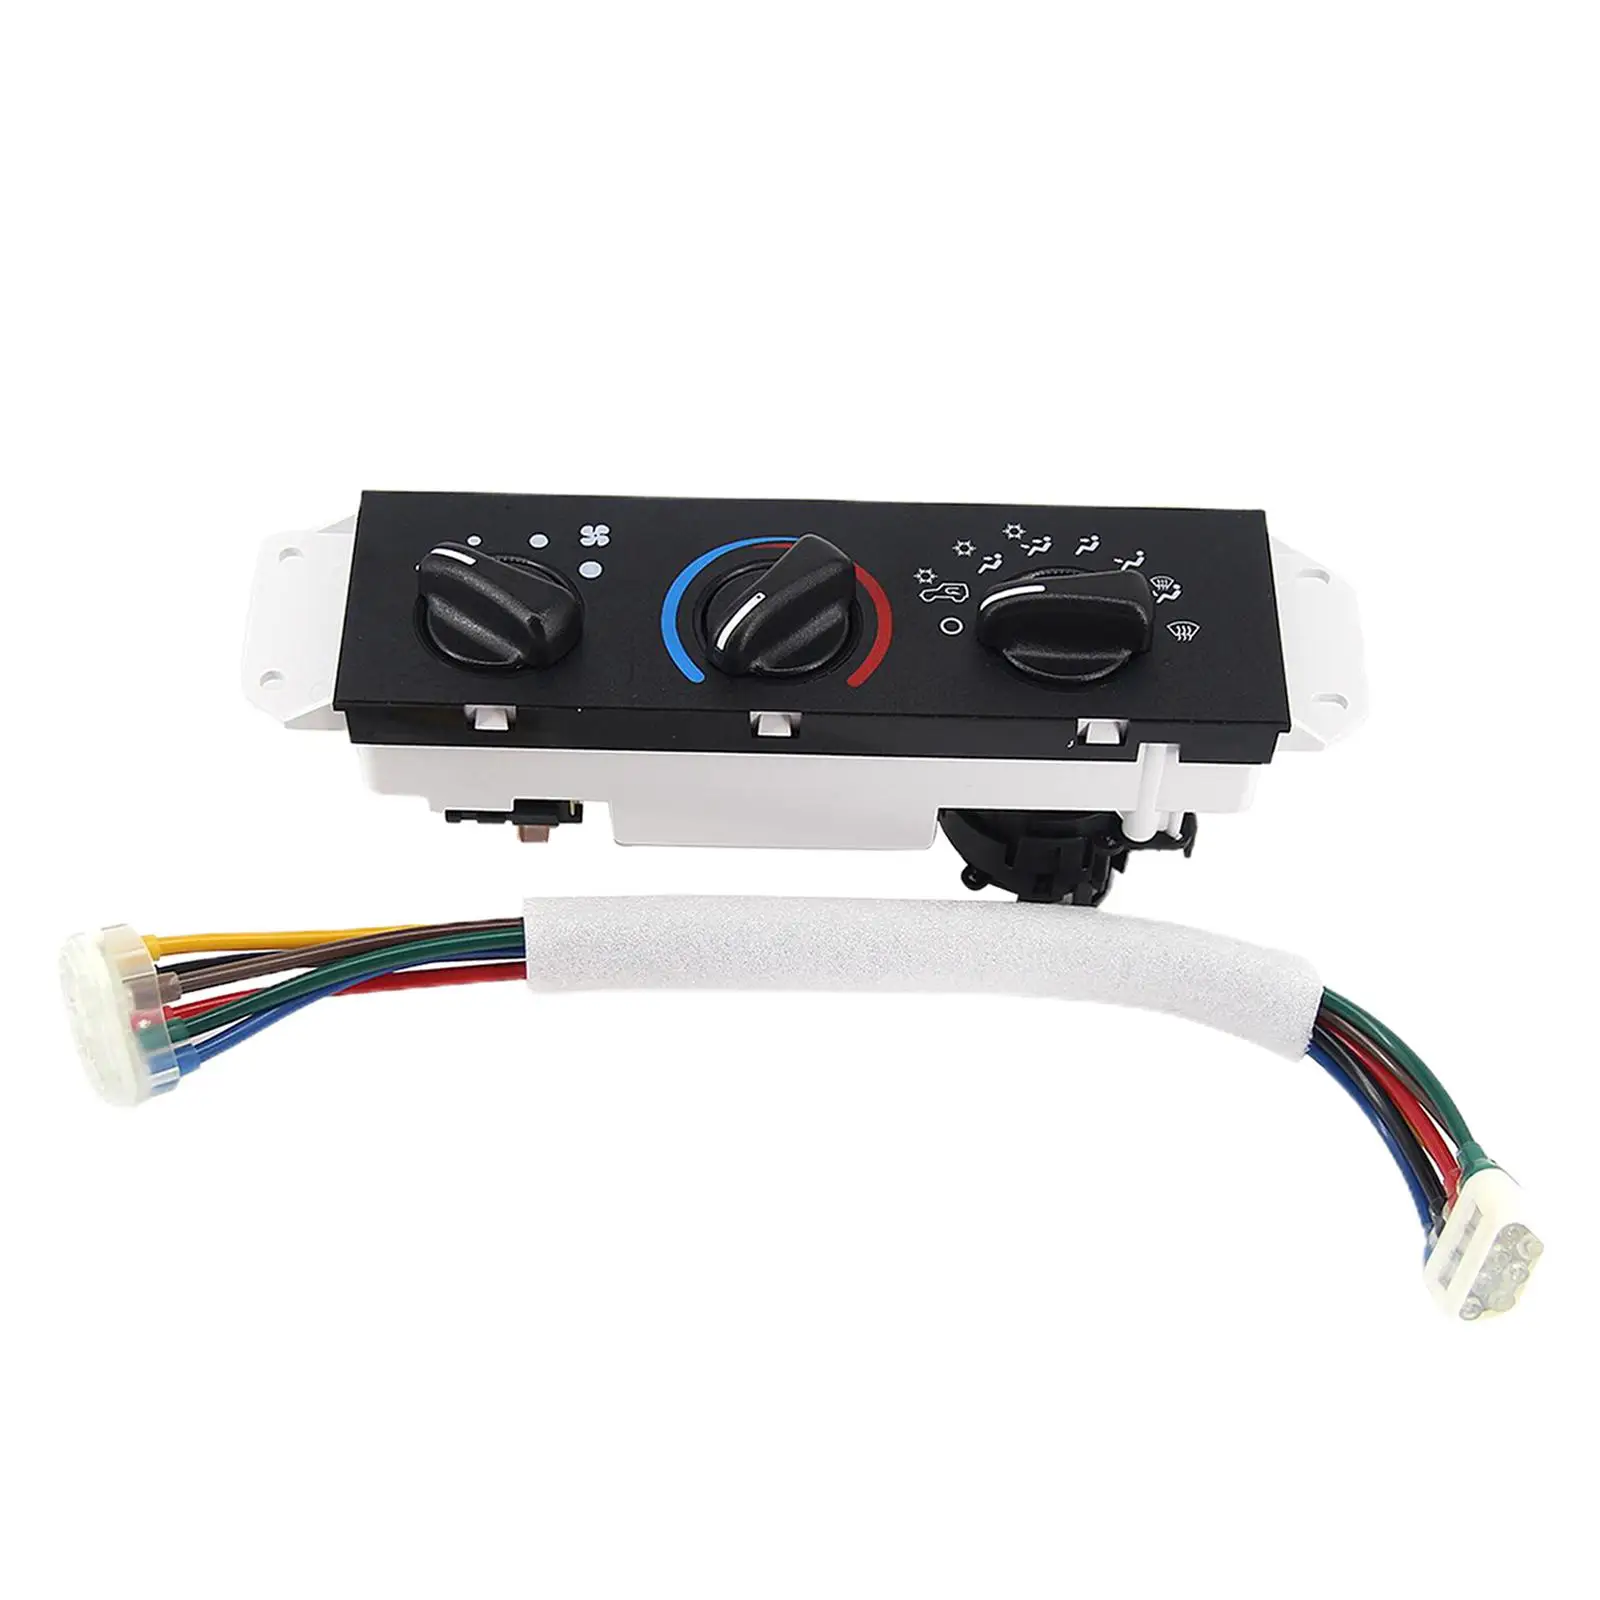 A/C Air Conditioning Heater Control Unit Panel Switch 999-01 2002-04, Replace your old, glitchy worn out 